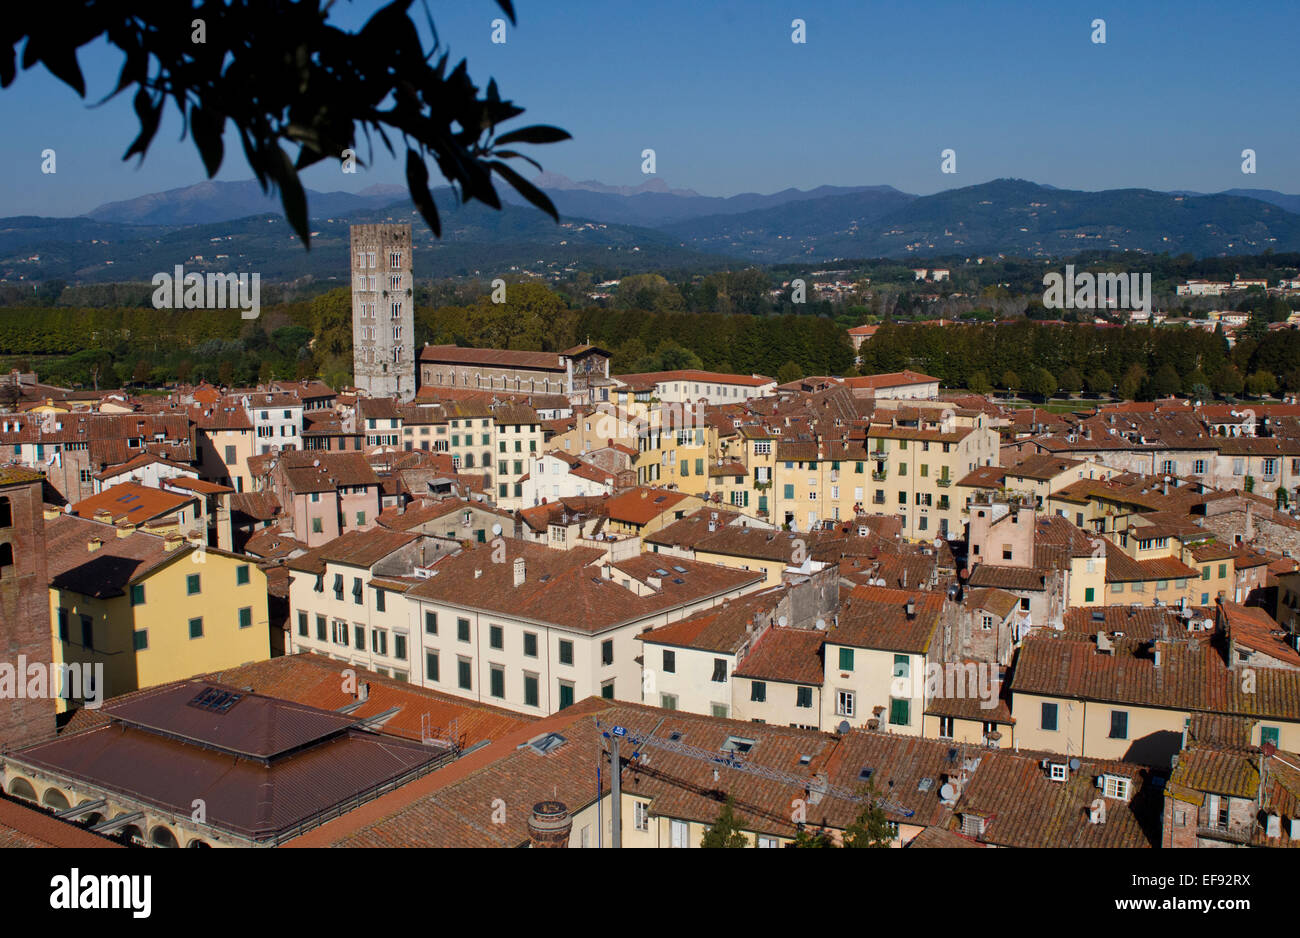 View from the top of the Guinigi tower showing the Roman Amphiteatre in Lucca, Tuscany, Italy Stock Photo